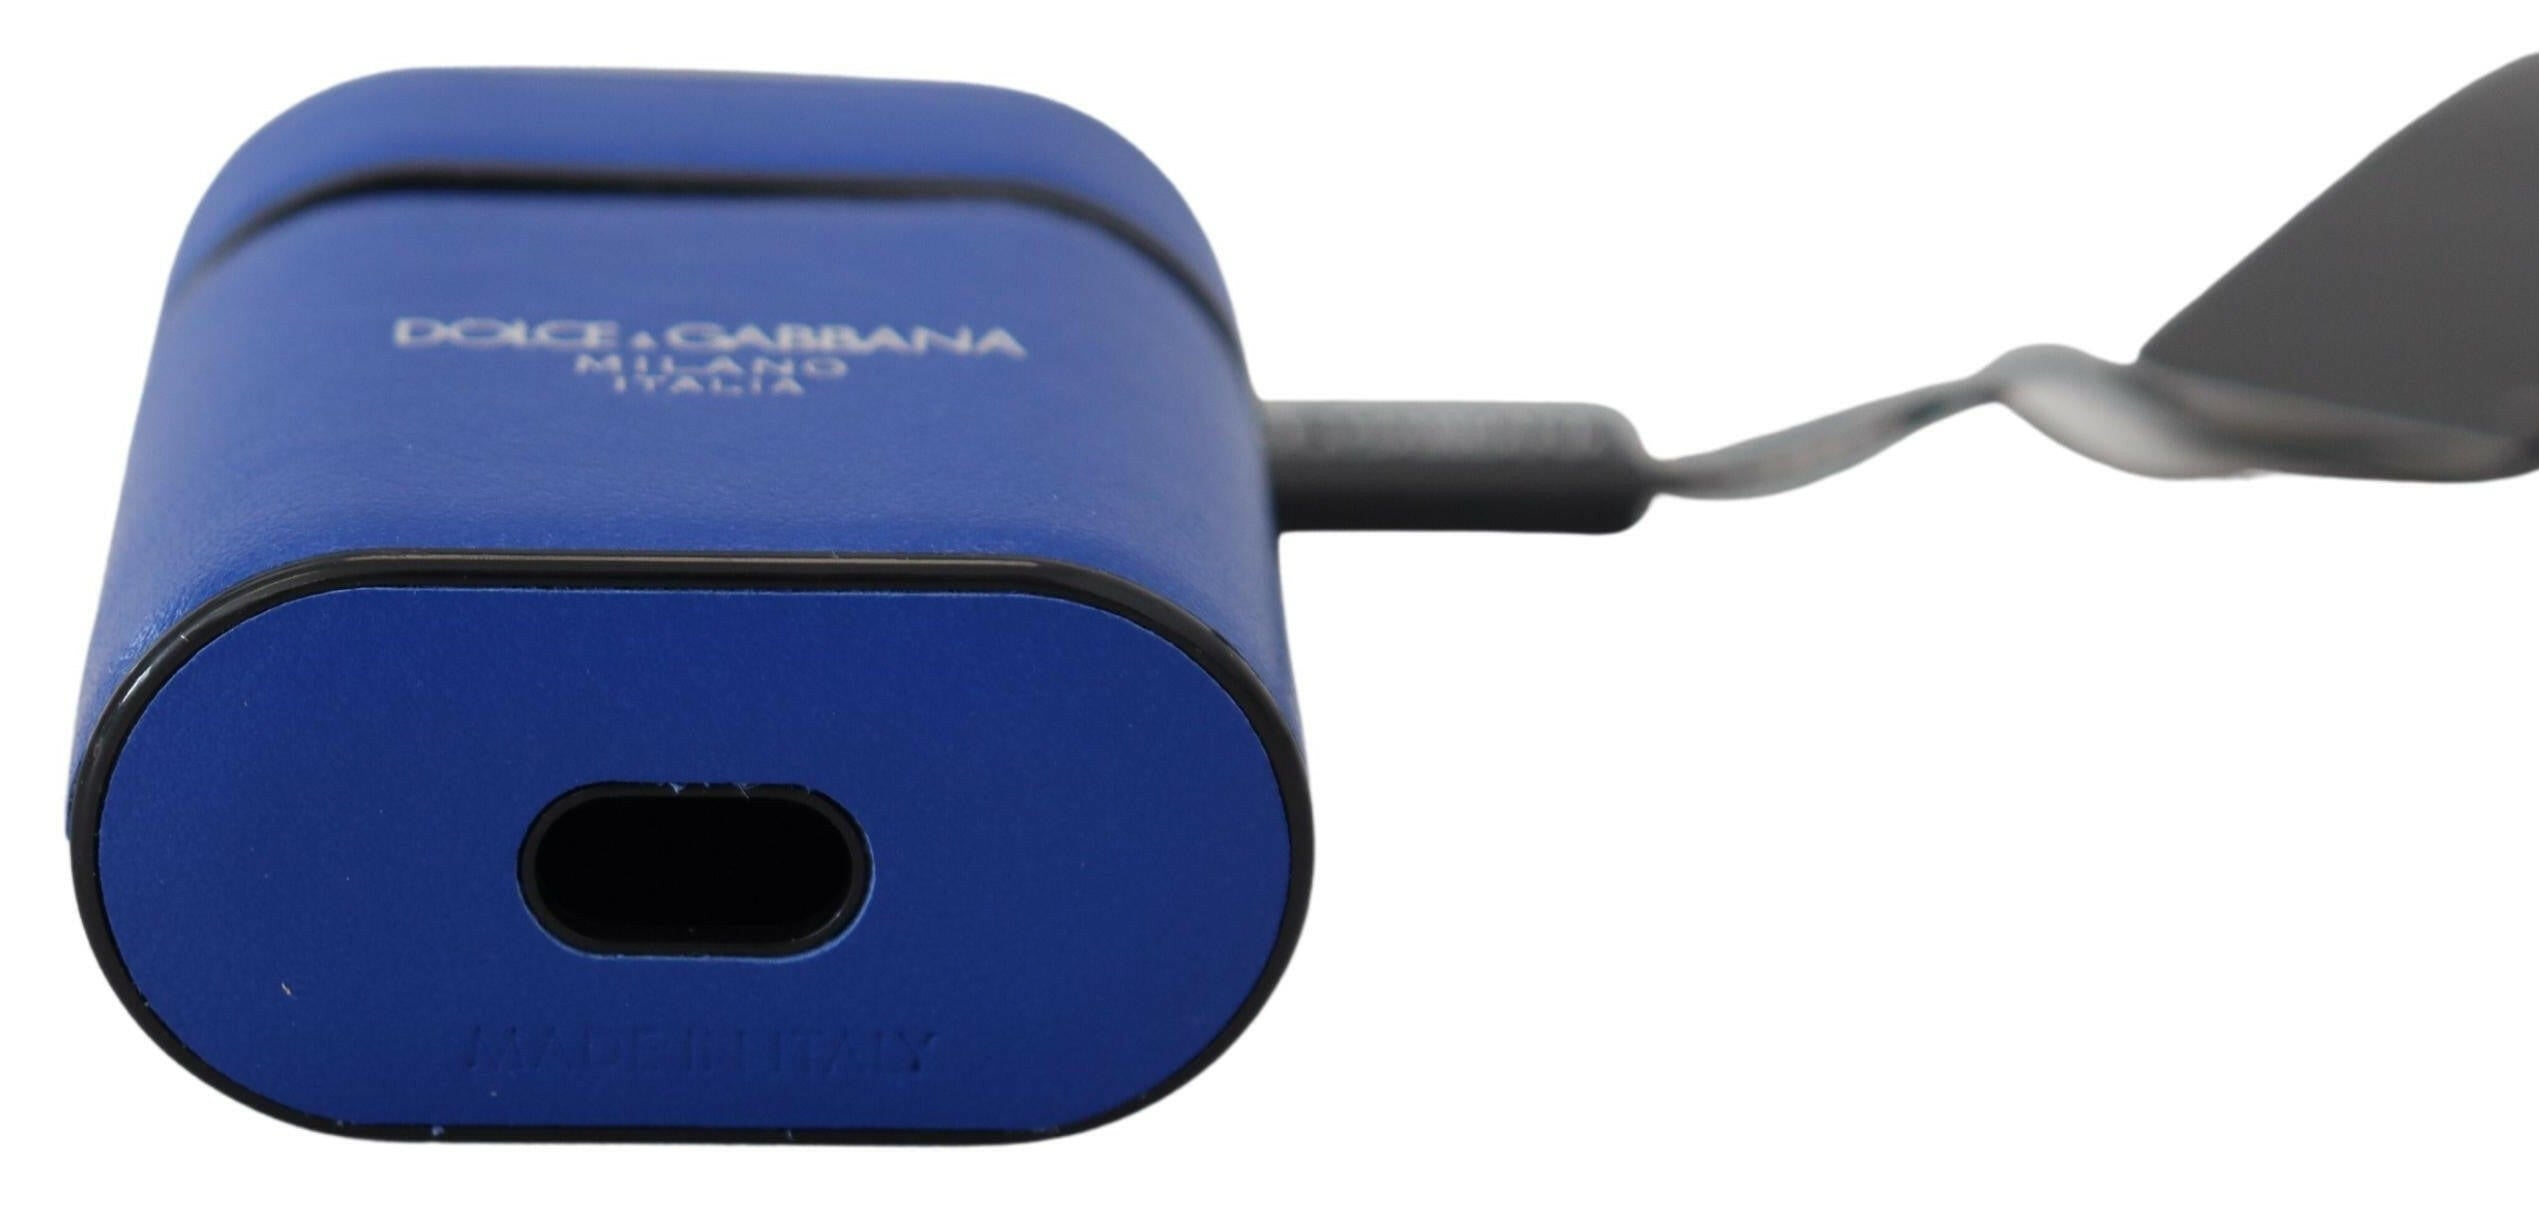 Dolce & Gabbana Blue Leather Silver Metal Logo Airpods Case - GENUINE AUTHENTIC BRAND LLC  